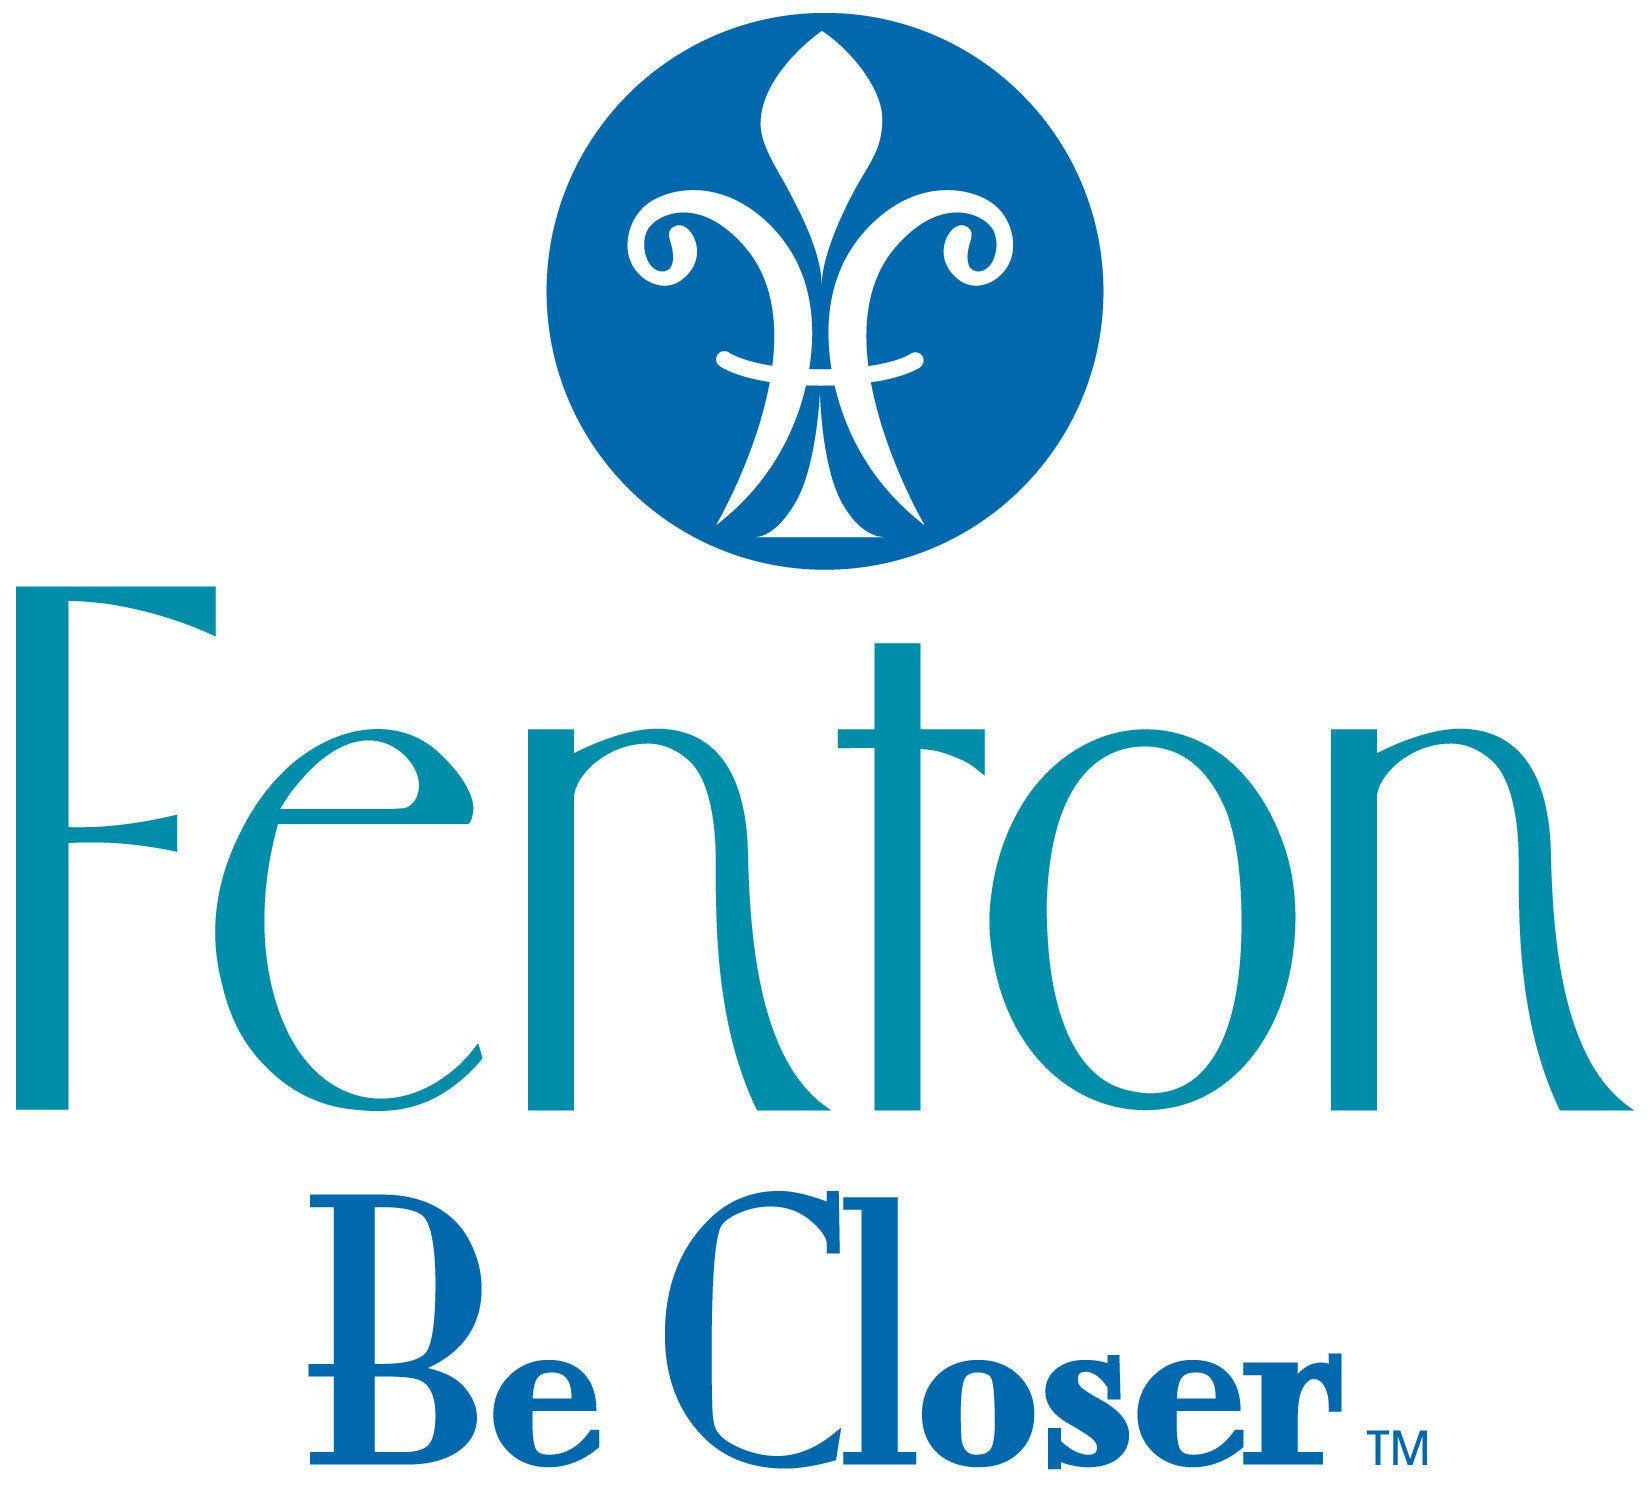 Fenton Logo - Fenton's marketing campaign begins with support from one local